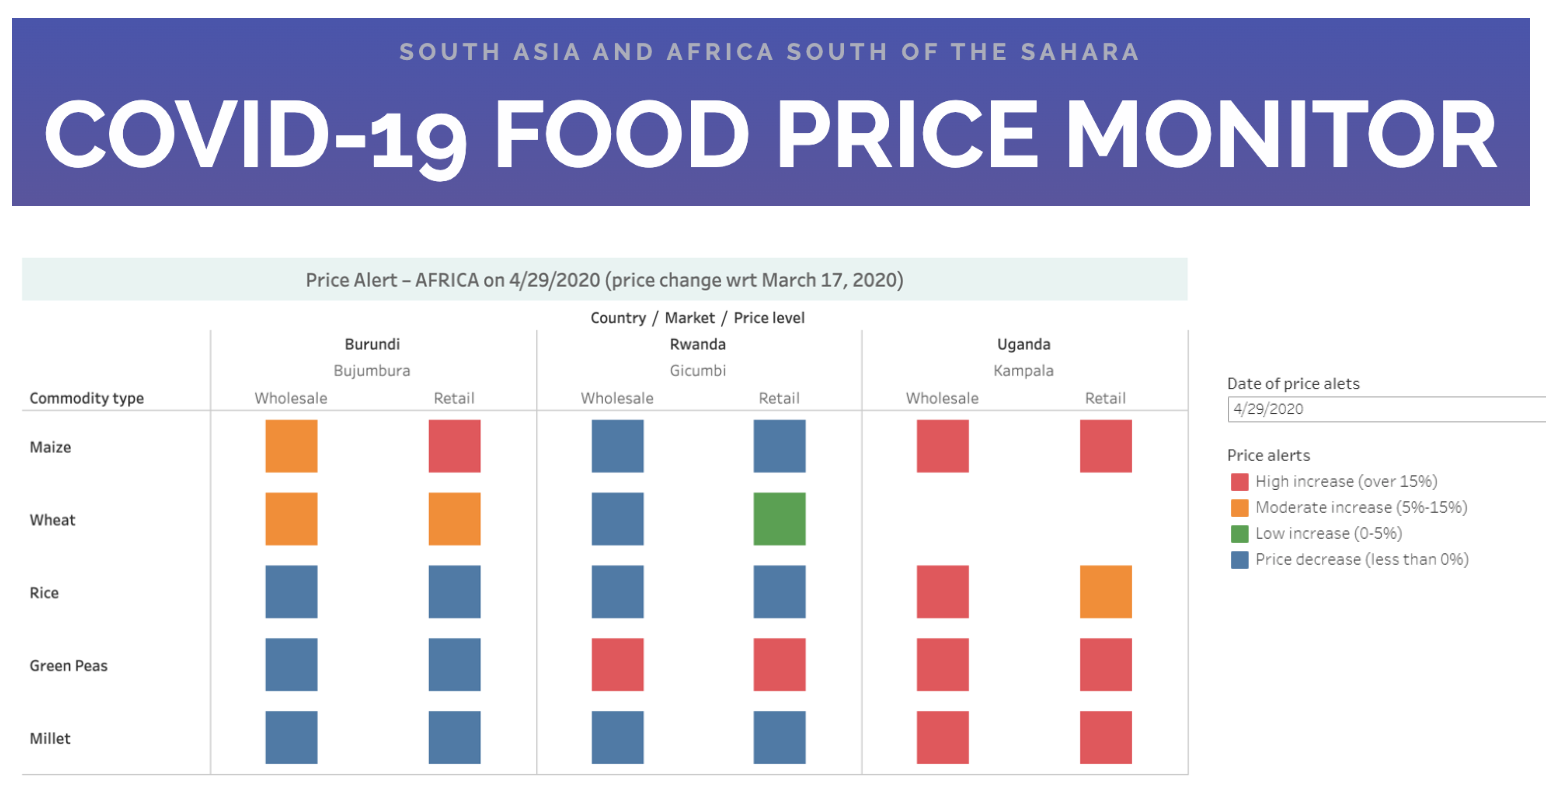 Ifpri S New Covid 19 Food Price Monitor Tracks Warning Signs Of Stress In Local Markets Ifpri International Food Policy Research Institute